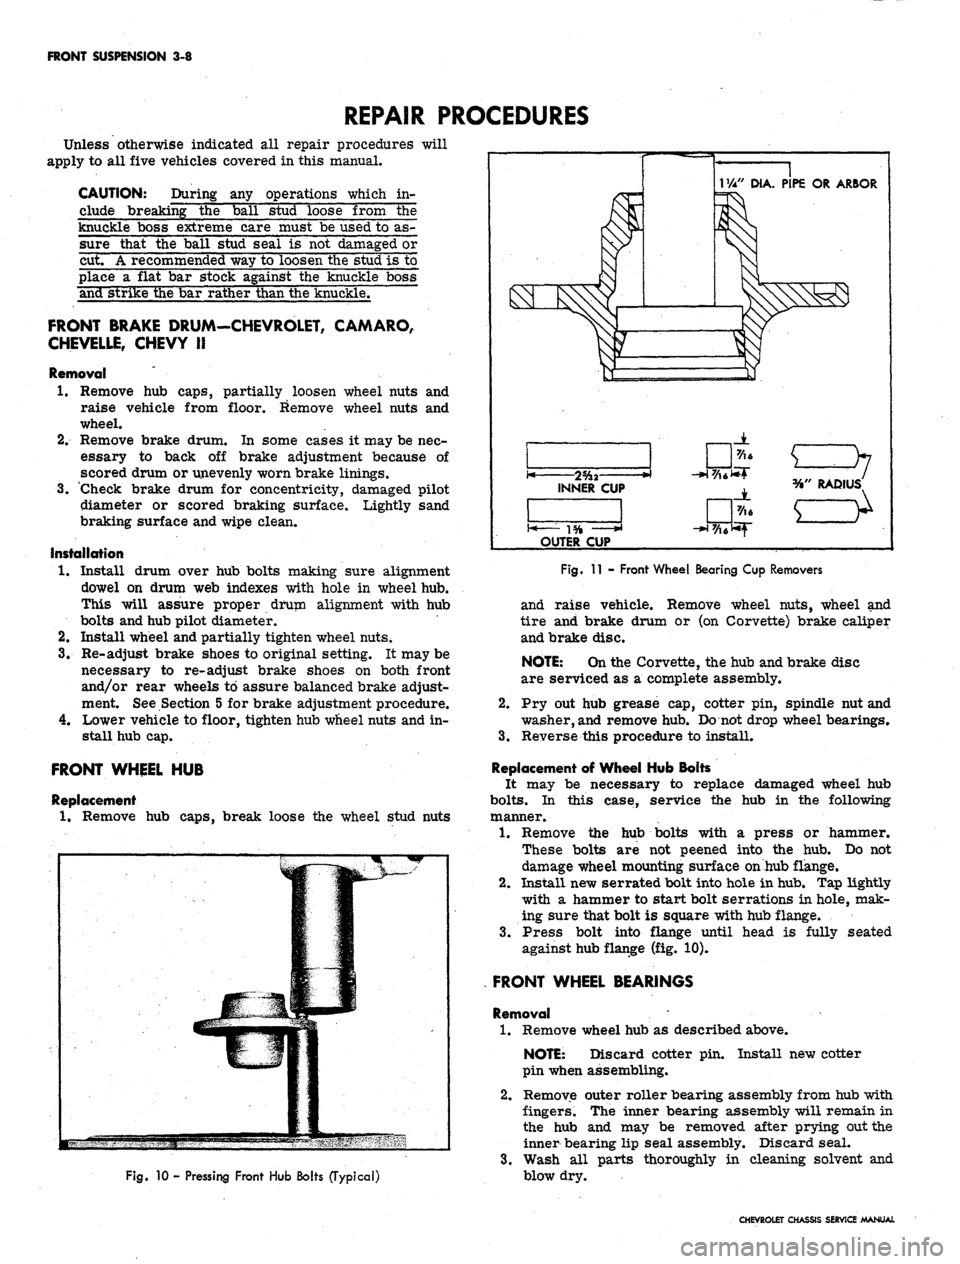 CHEVROLET CAMARO 1967 1.G Chassis Workshop Manual 
FRONT SUSPENSION 3-8

REPAIR PROCEDURES

Unless otherwise indicated all repair procedures will

apply to all five vehicles covered in this manual.

CAUTION: During any operations which in-

clude bre